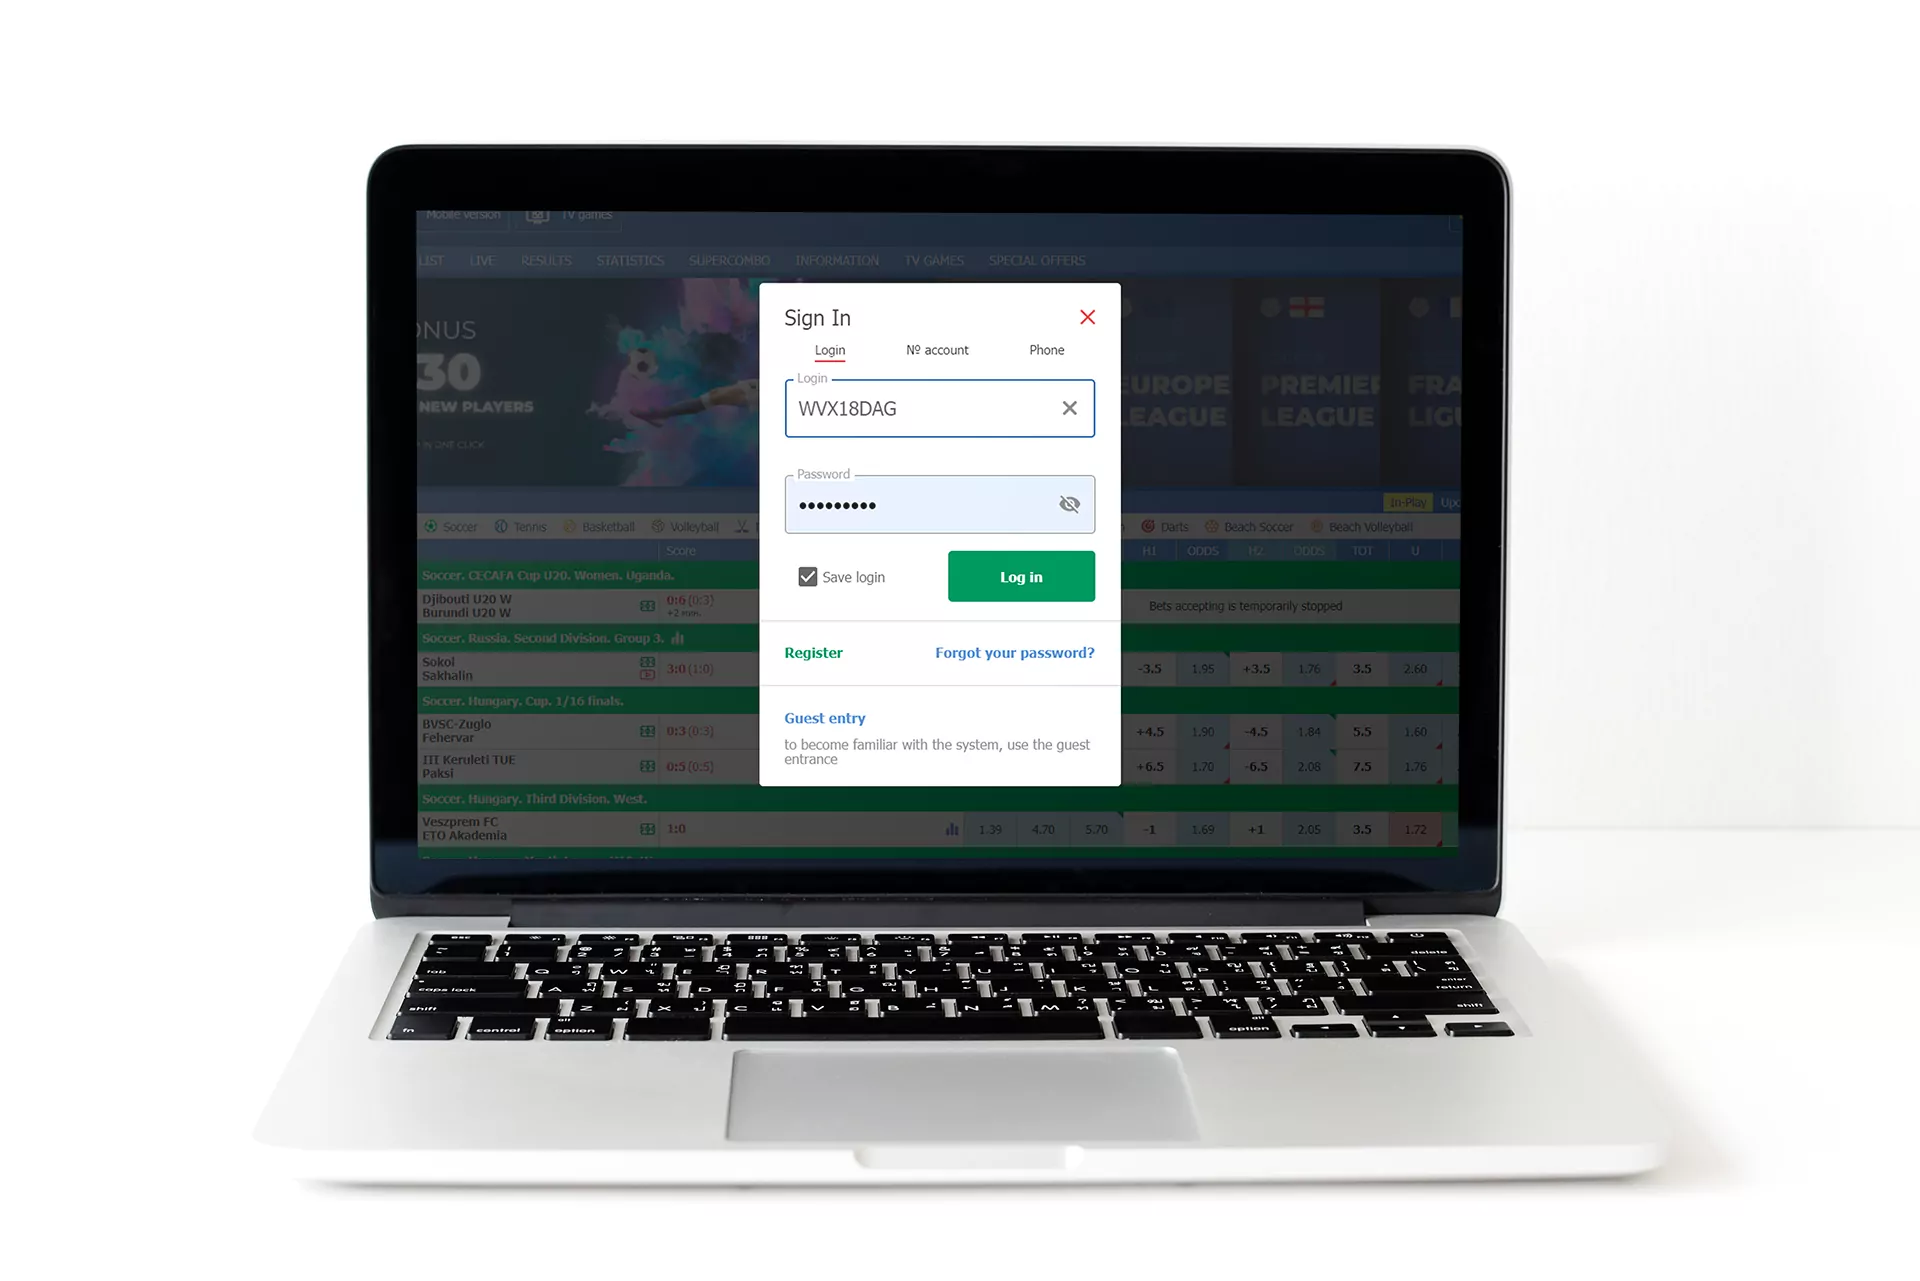 Log in to your existing account or sign up for Betcity.